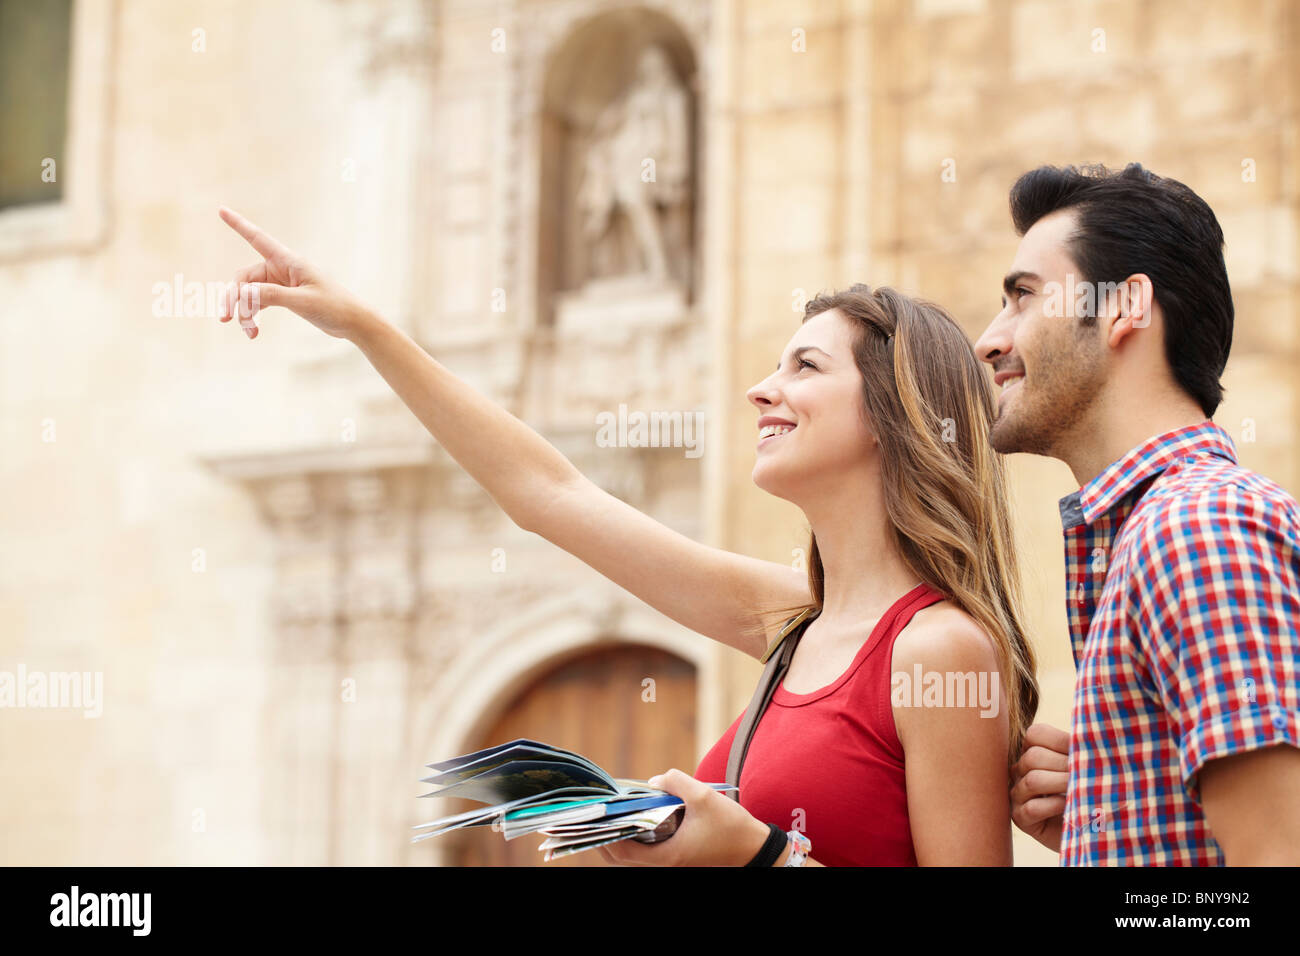 Smiling young woman pointing out sights Stock Photo